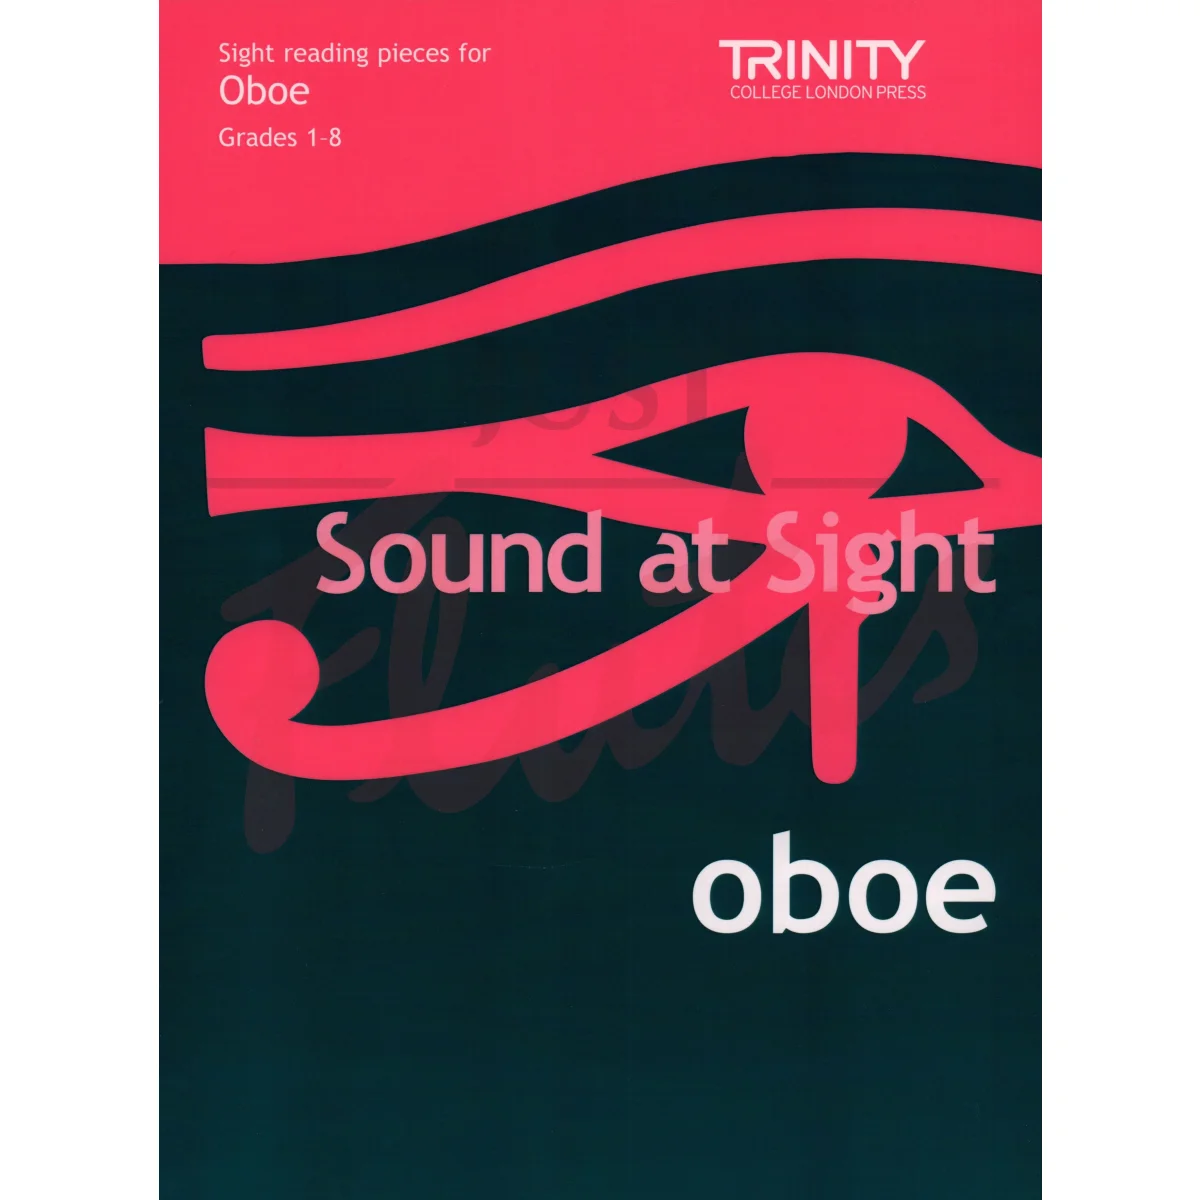 Sound at Sight Grades 1-8 for Oboe